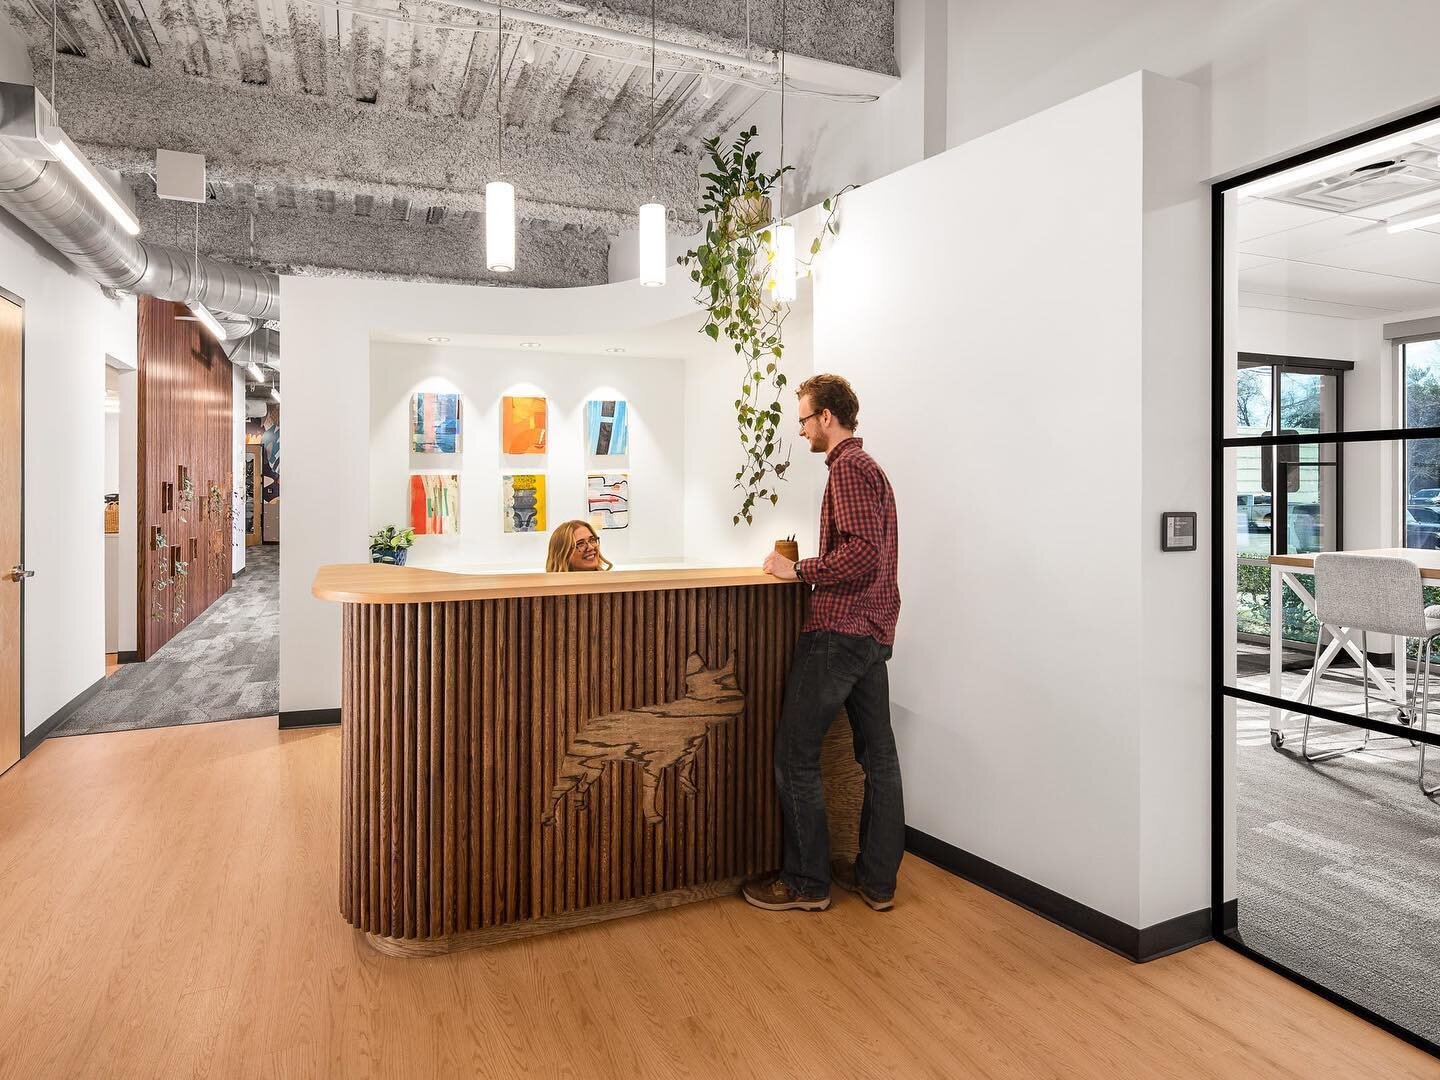 After considerable growth in their Gulch location, Studio Bank reached out to collaborate on another tenant fit-out project. Program requirements consisted of traditional private offices with adjacent open-office zones, a variety of meeting rooms, to